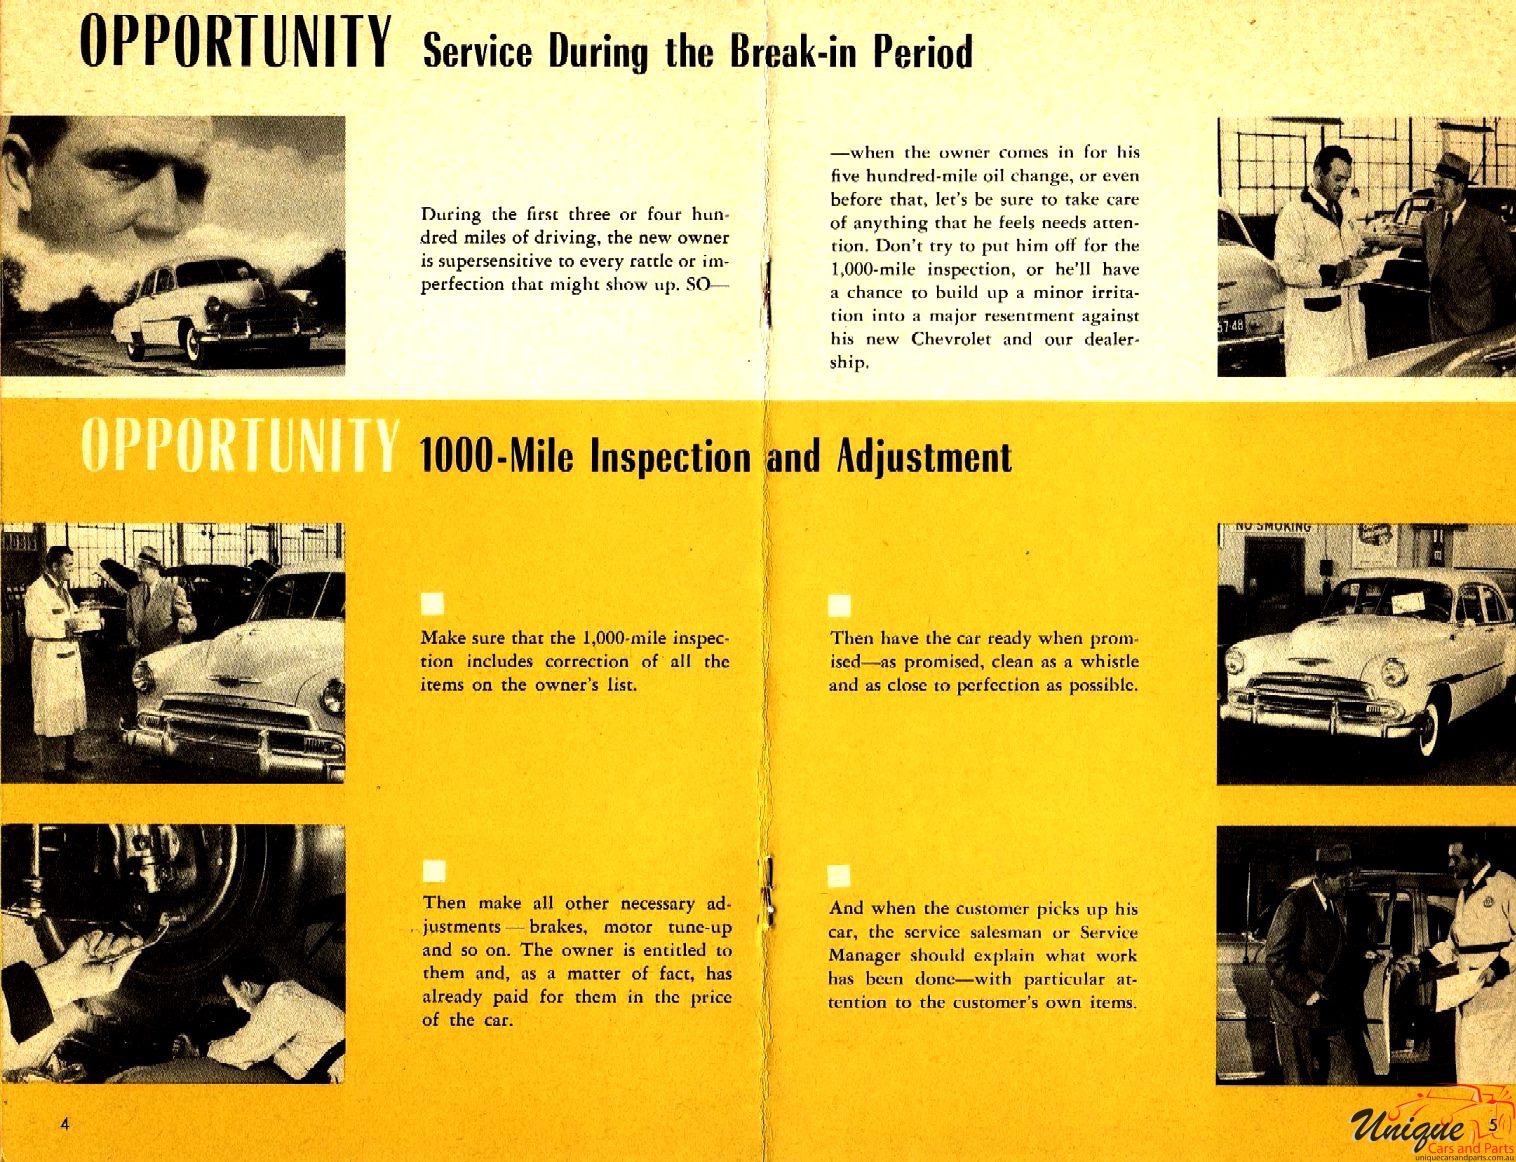 1951 Chevrolet Opportunity Unlimited Brochure Page 5